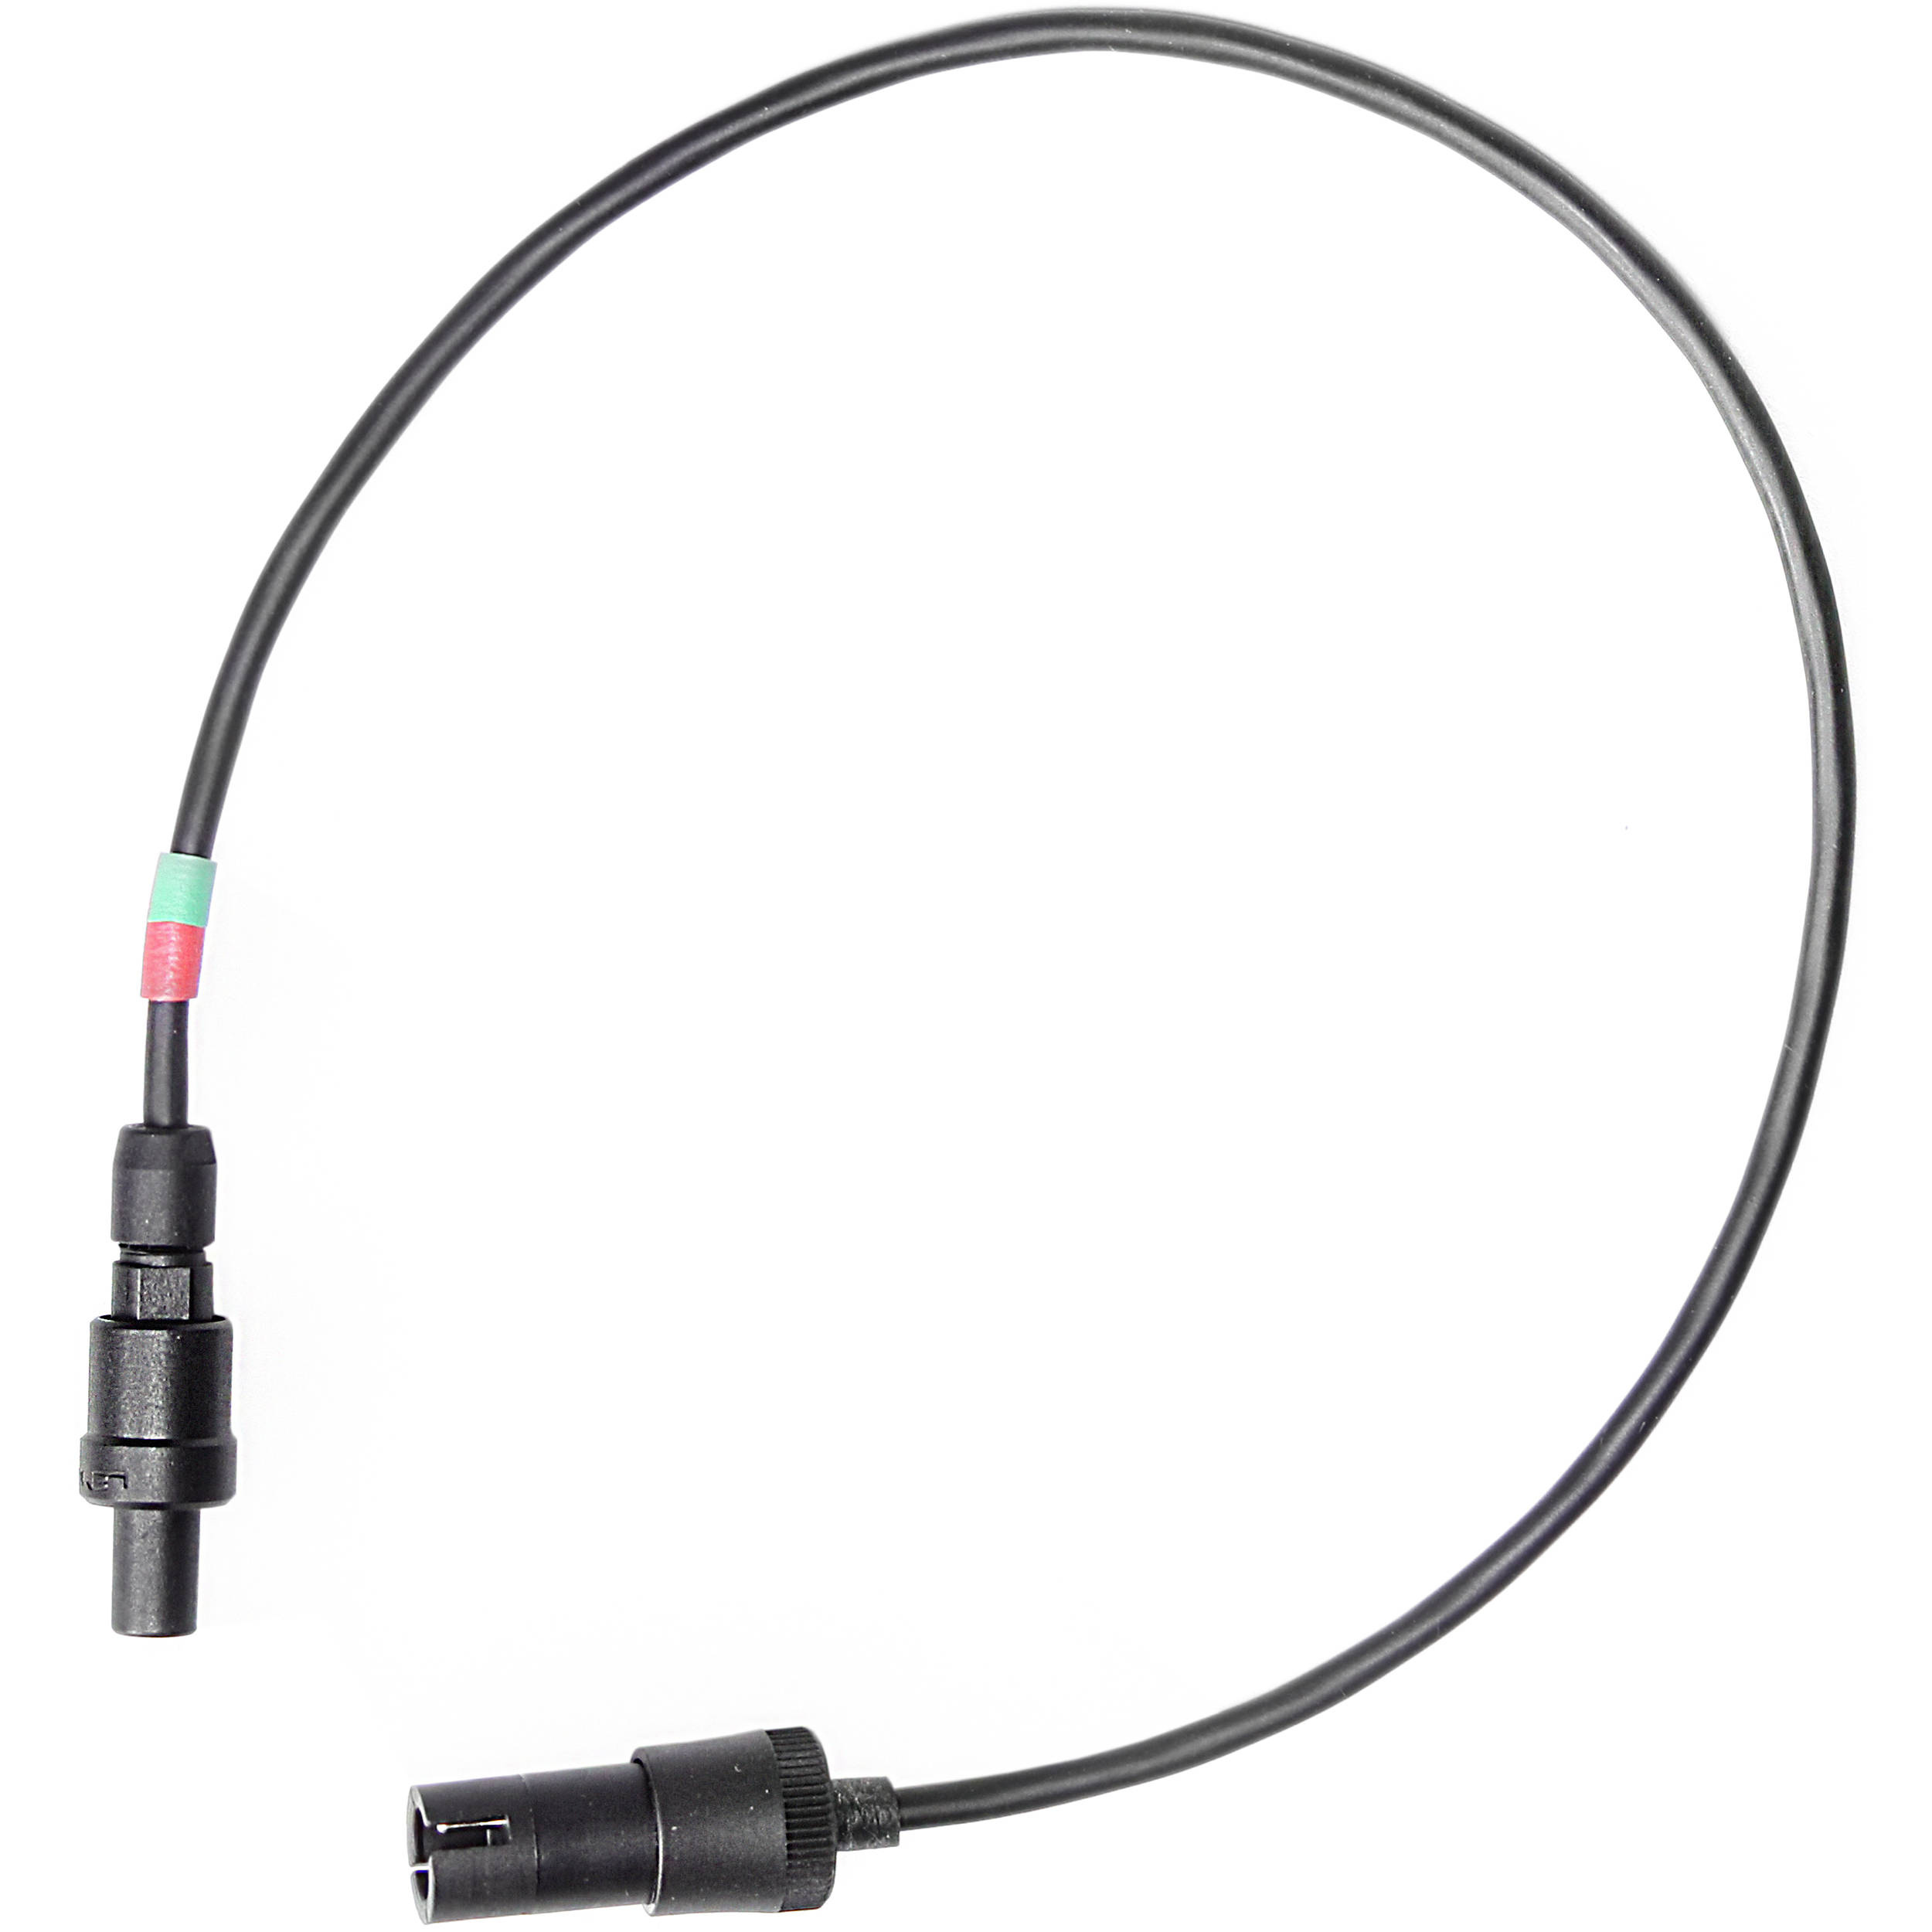 Rycote ConnBox Replacement Tail Cable